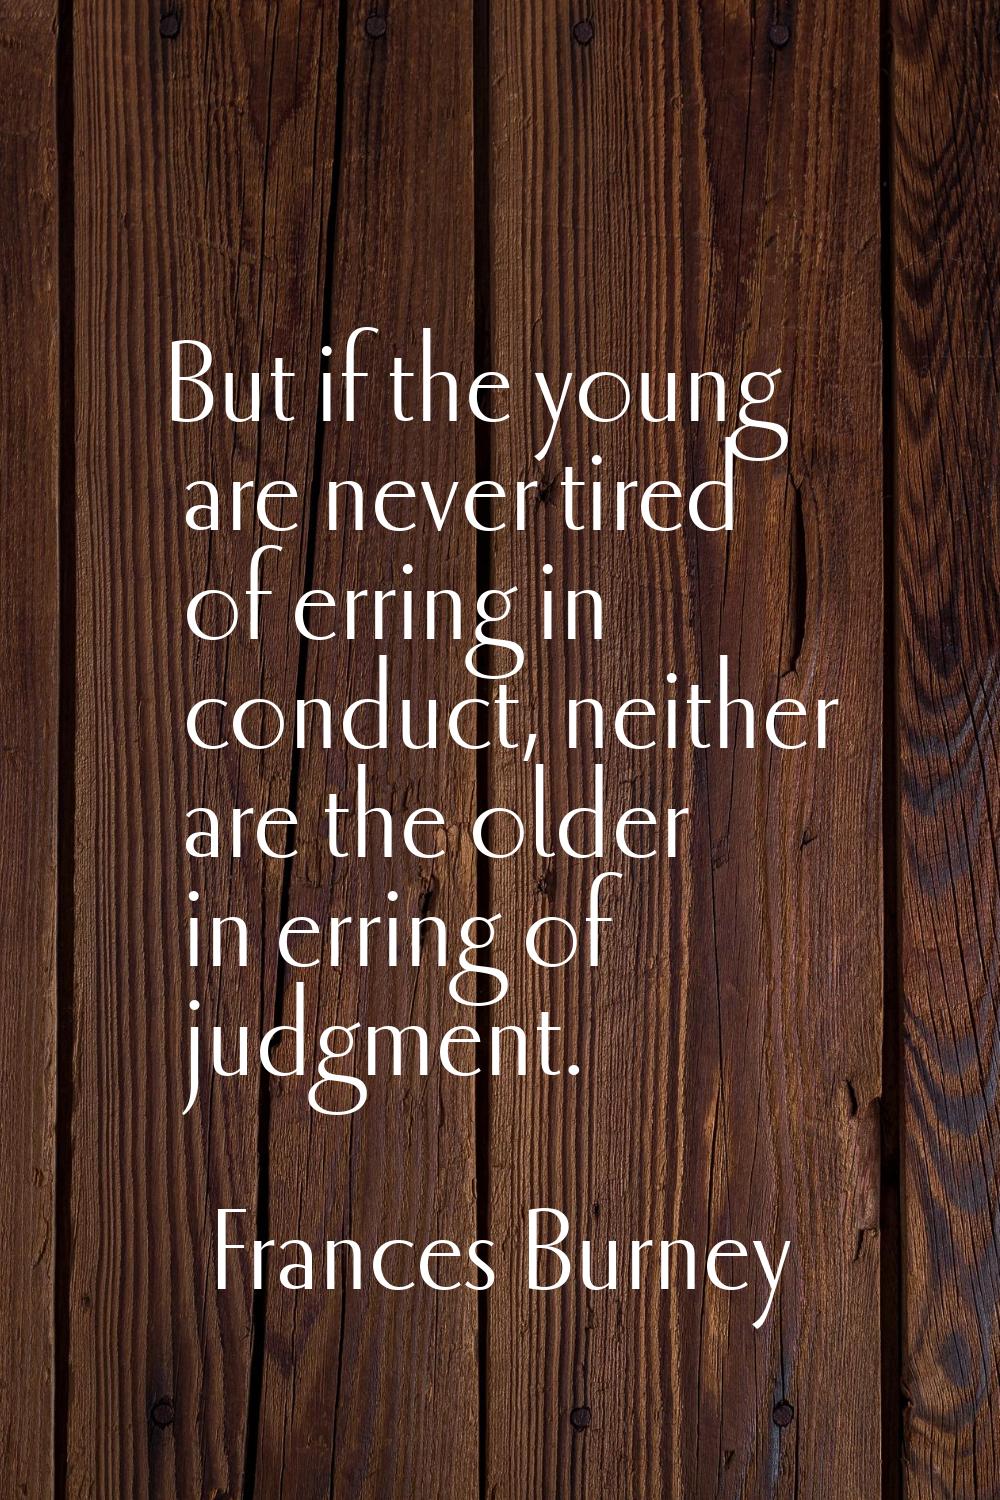 But if the young are never tired of erring in conduct, neither are the older in erring of judgment.